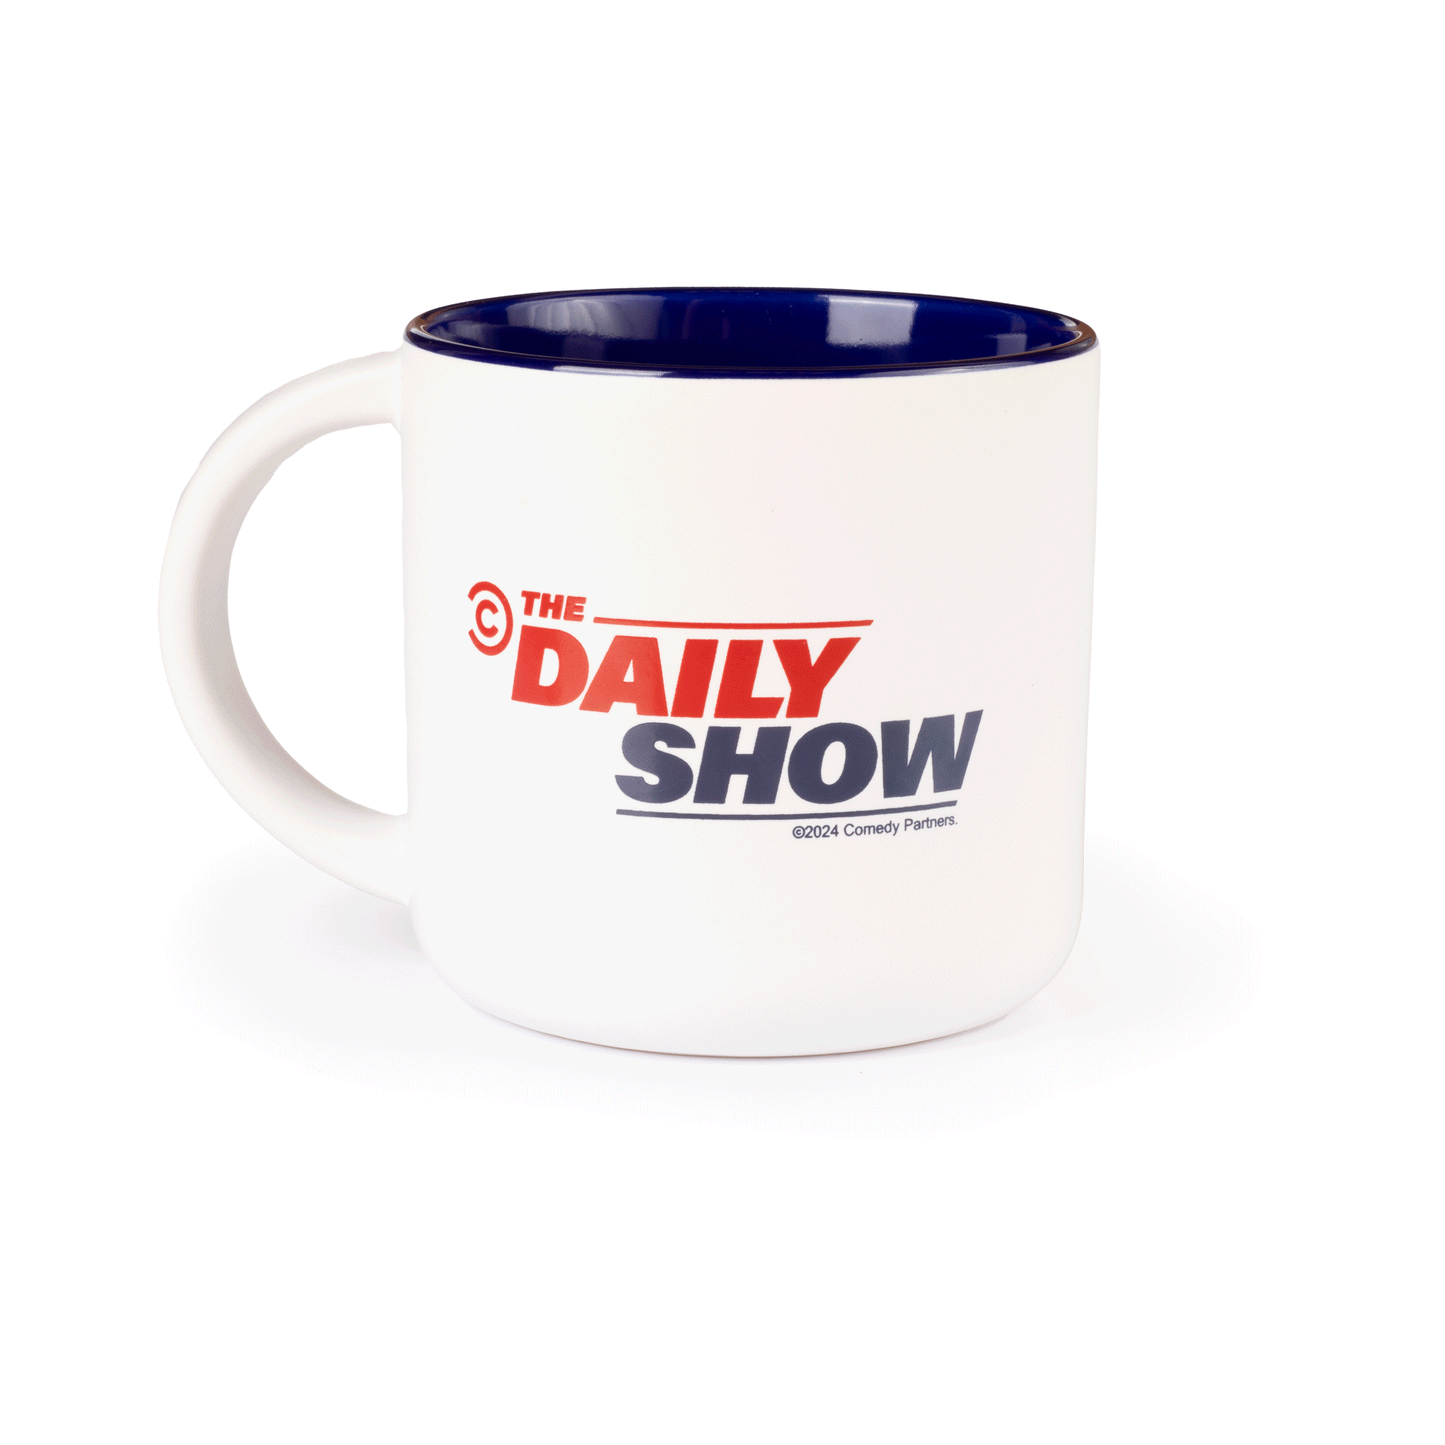 The Daily Show As Seen On Mug